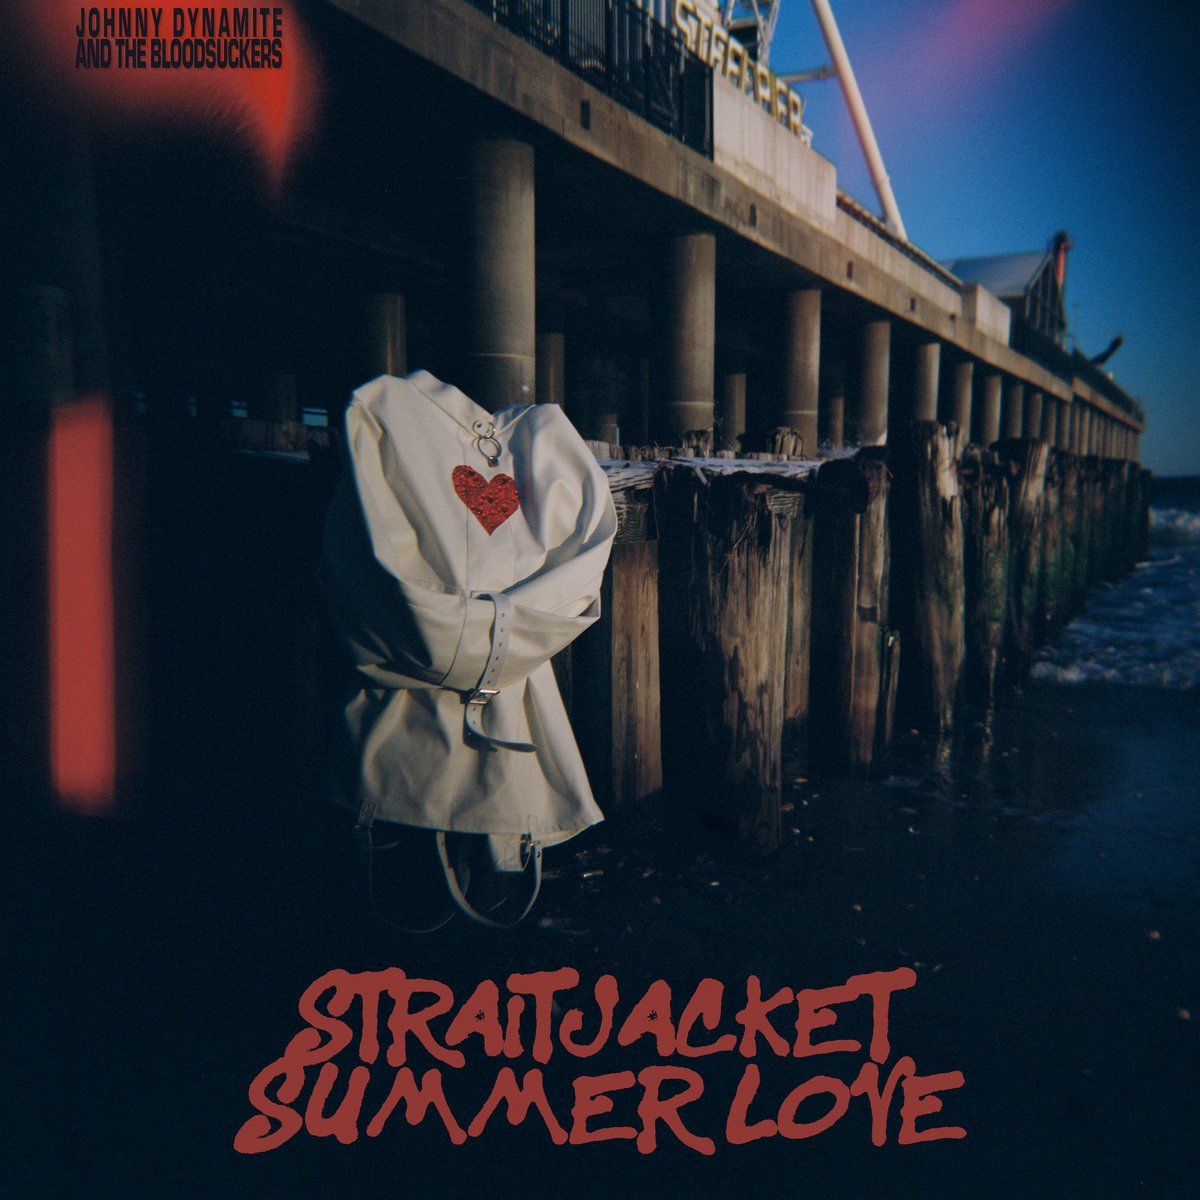 Johnny Dynamite & The Blood Suckers Debut New Single “Straitjacket Summer Love” Ahead of Spring Tour